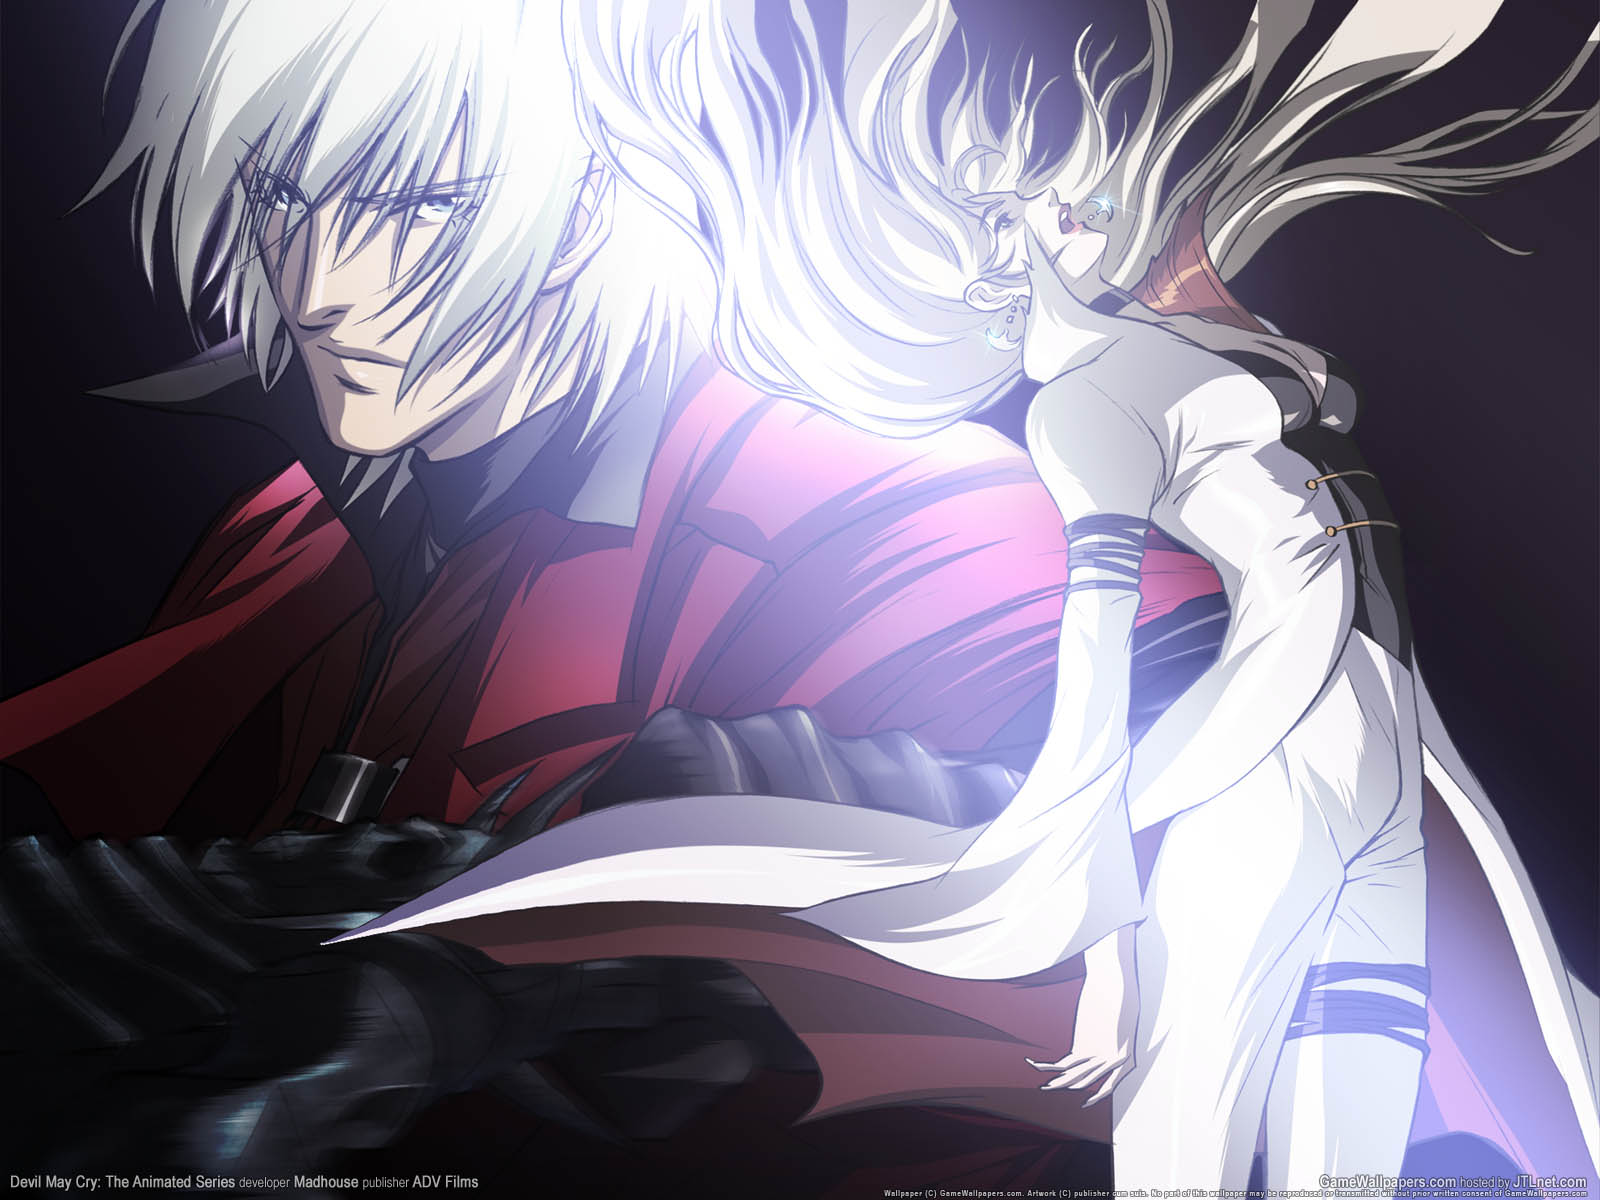 Devil May Cry%3A The Animated Series fond d'cran 02 1600x1200